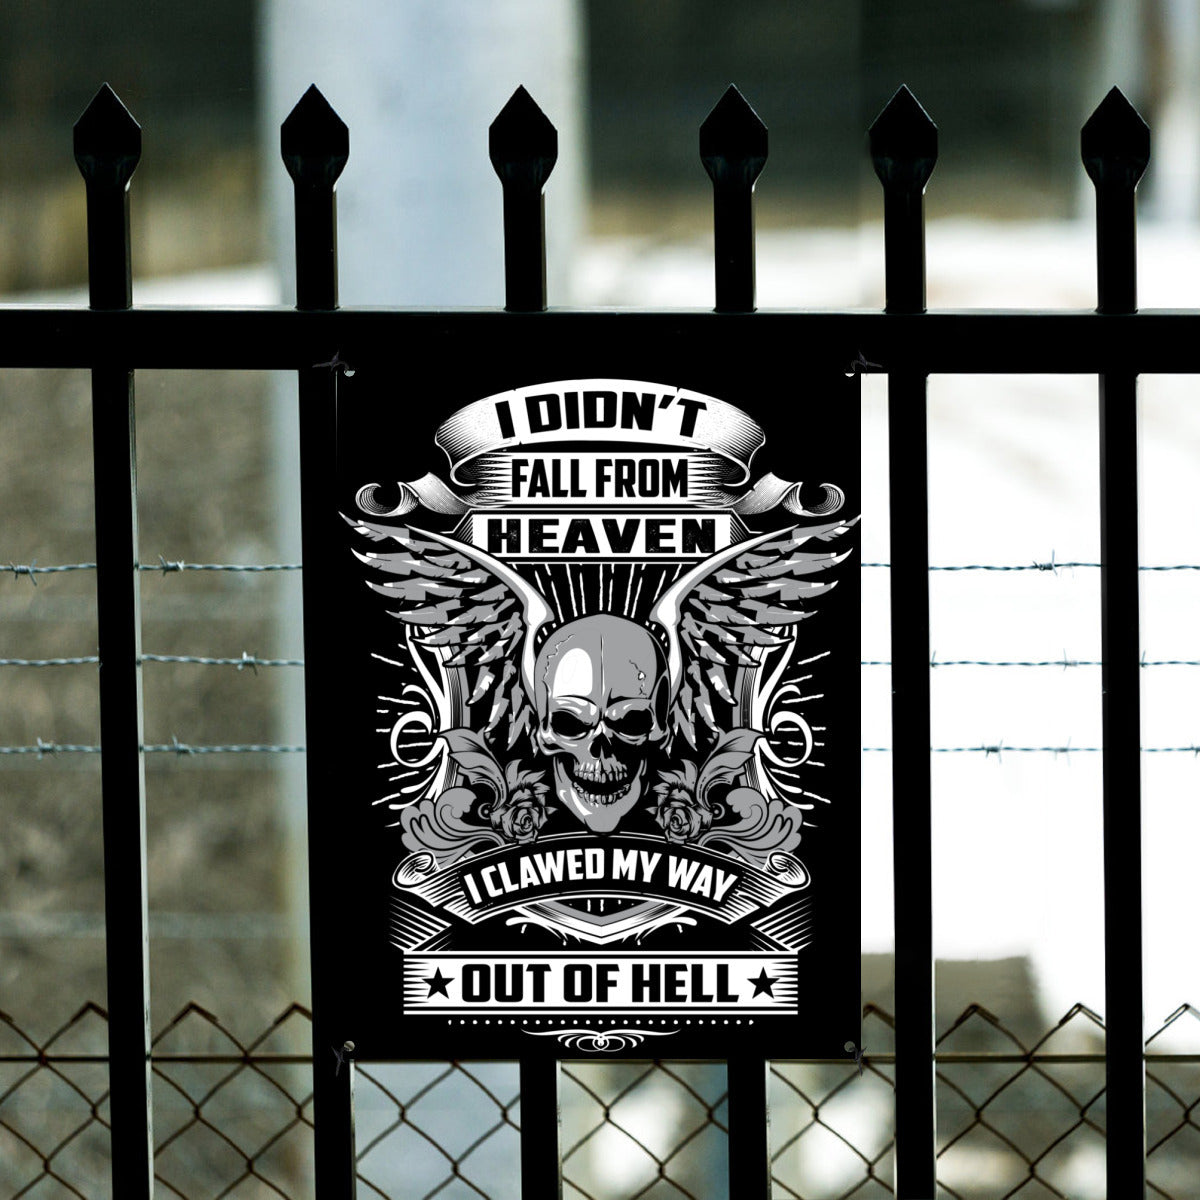 I Clawed My Way Out Of Hell Aluminum Sign